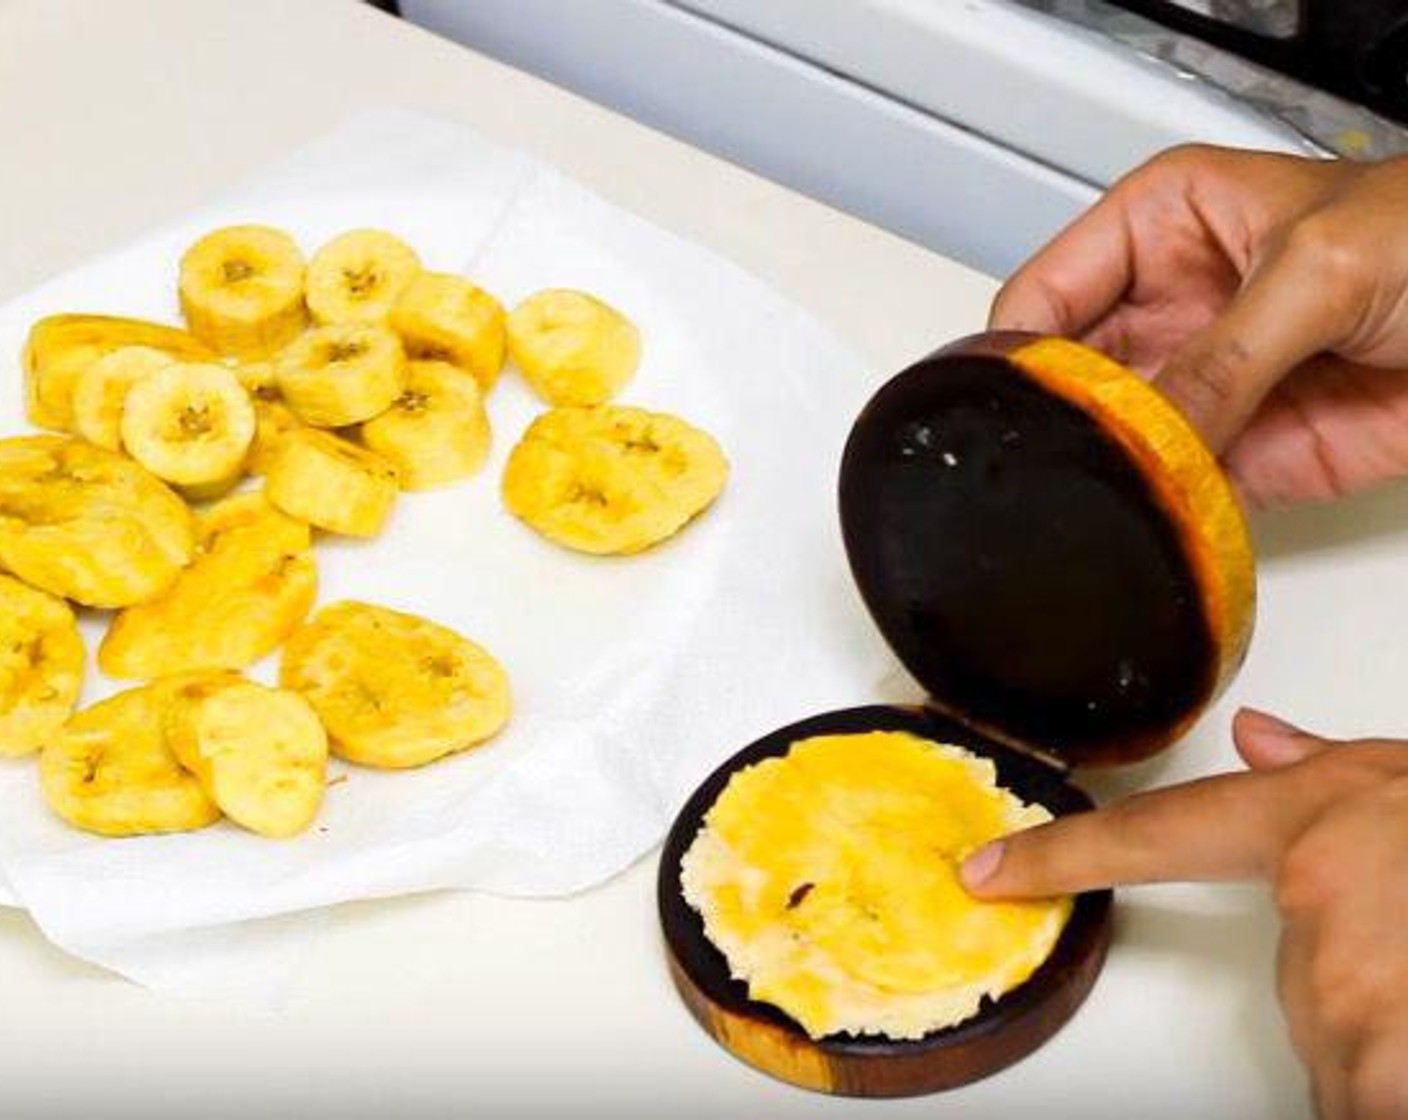 step 4 Mash the plantain slices and return them to the oil. Cook for about 45 seconds on each side, or until crispy.